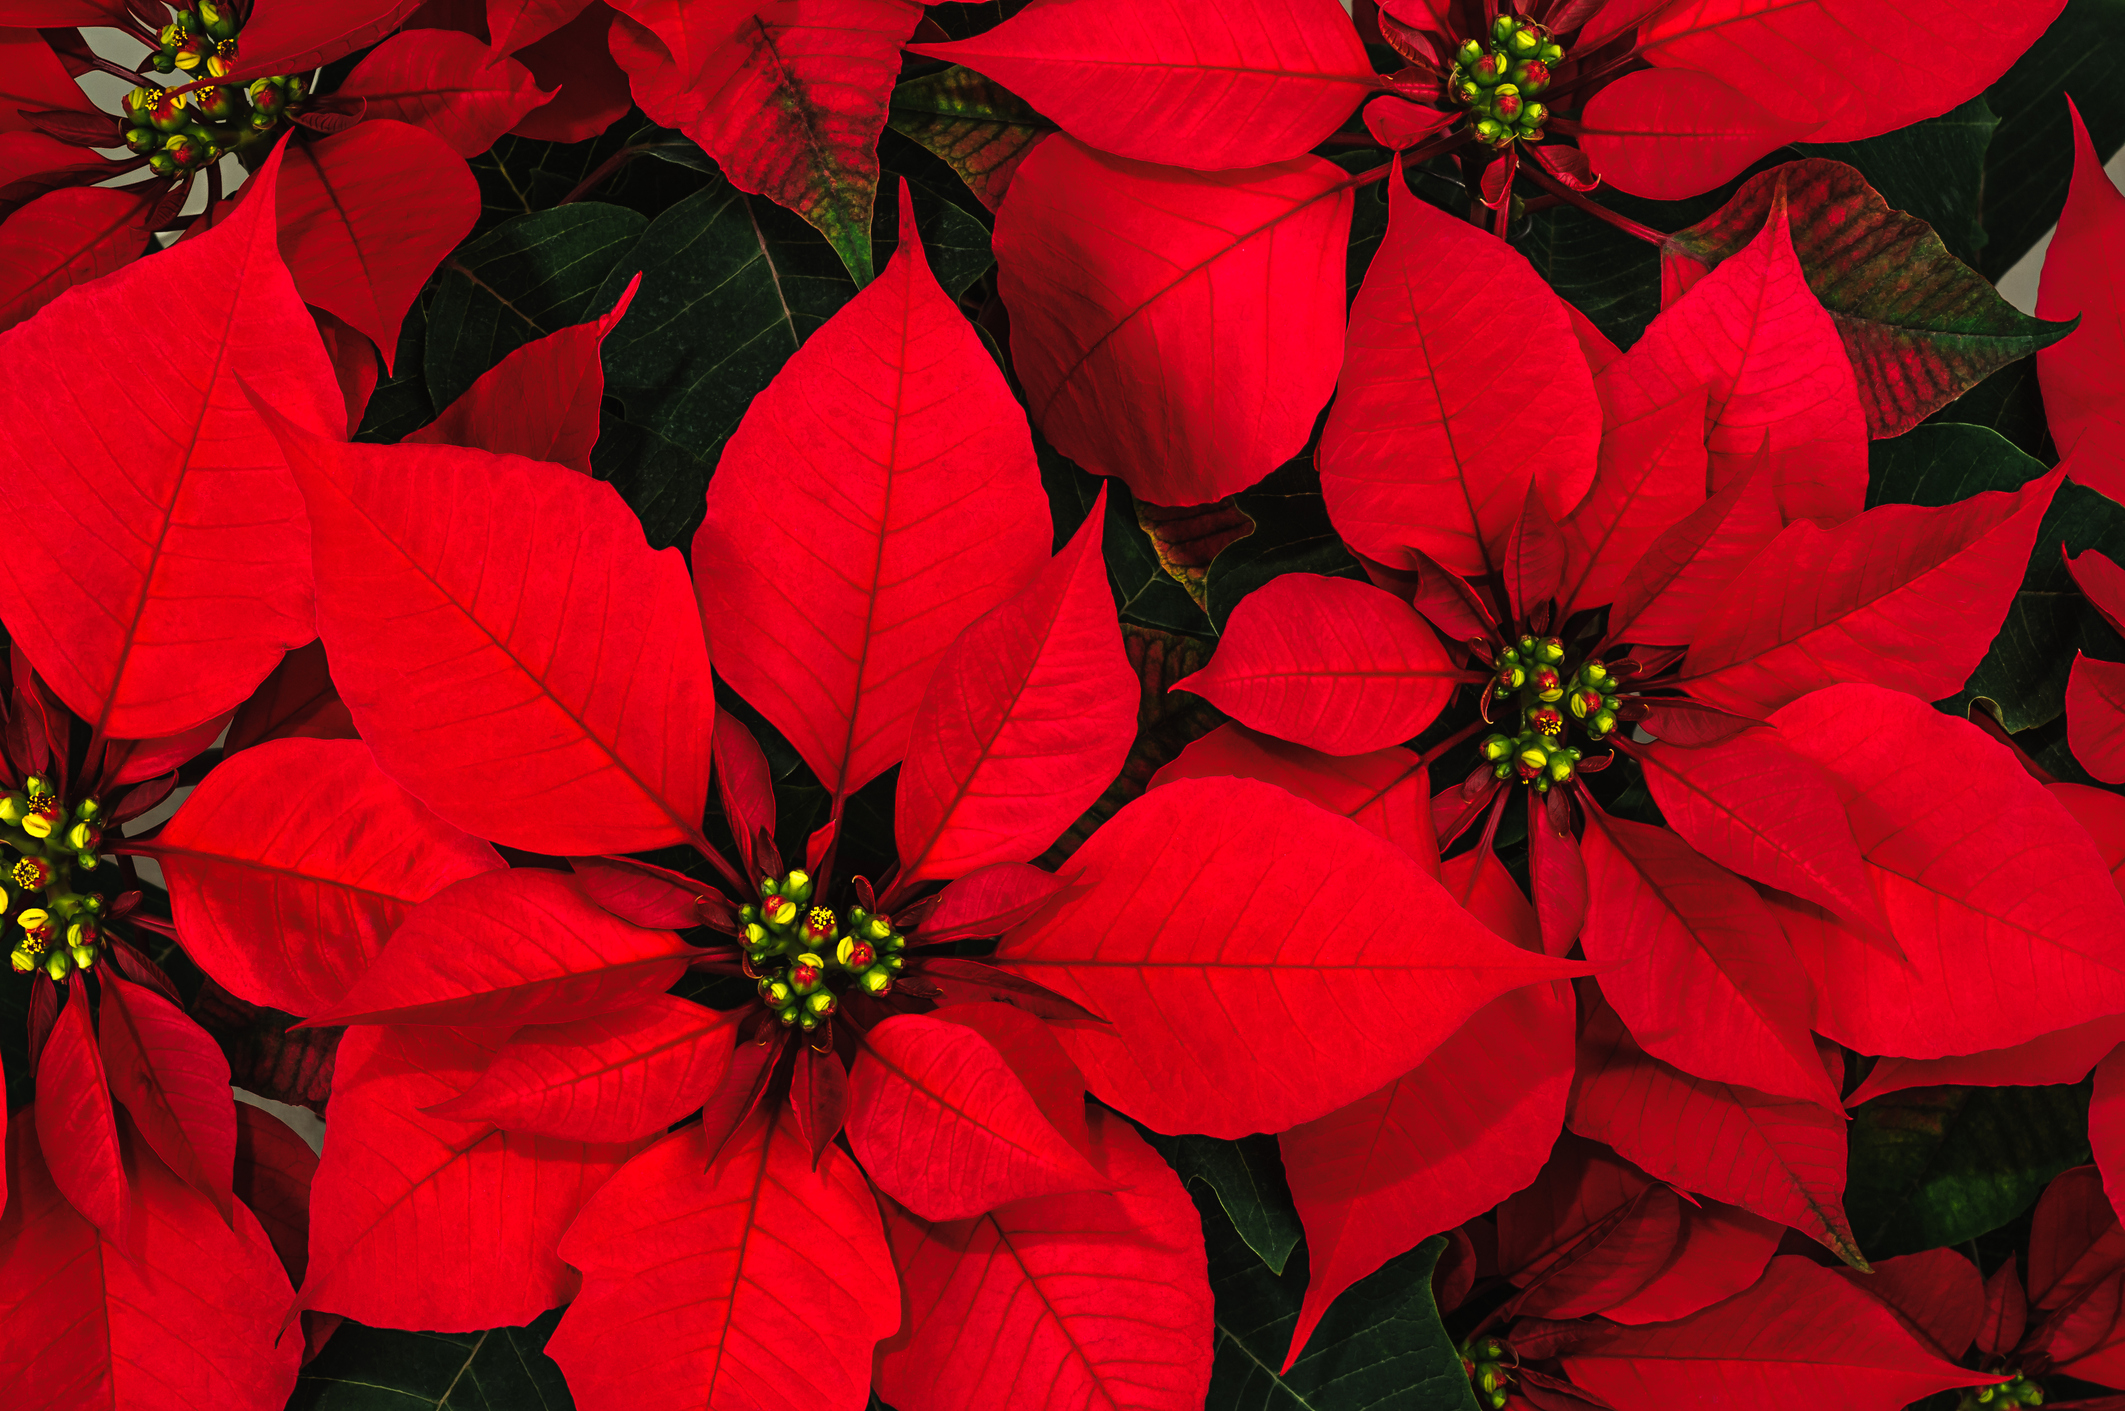 The Origins of the Poinsettia: A Long, Strange Tale